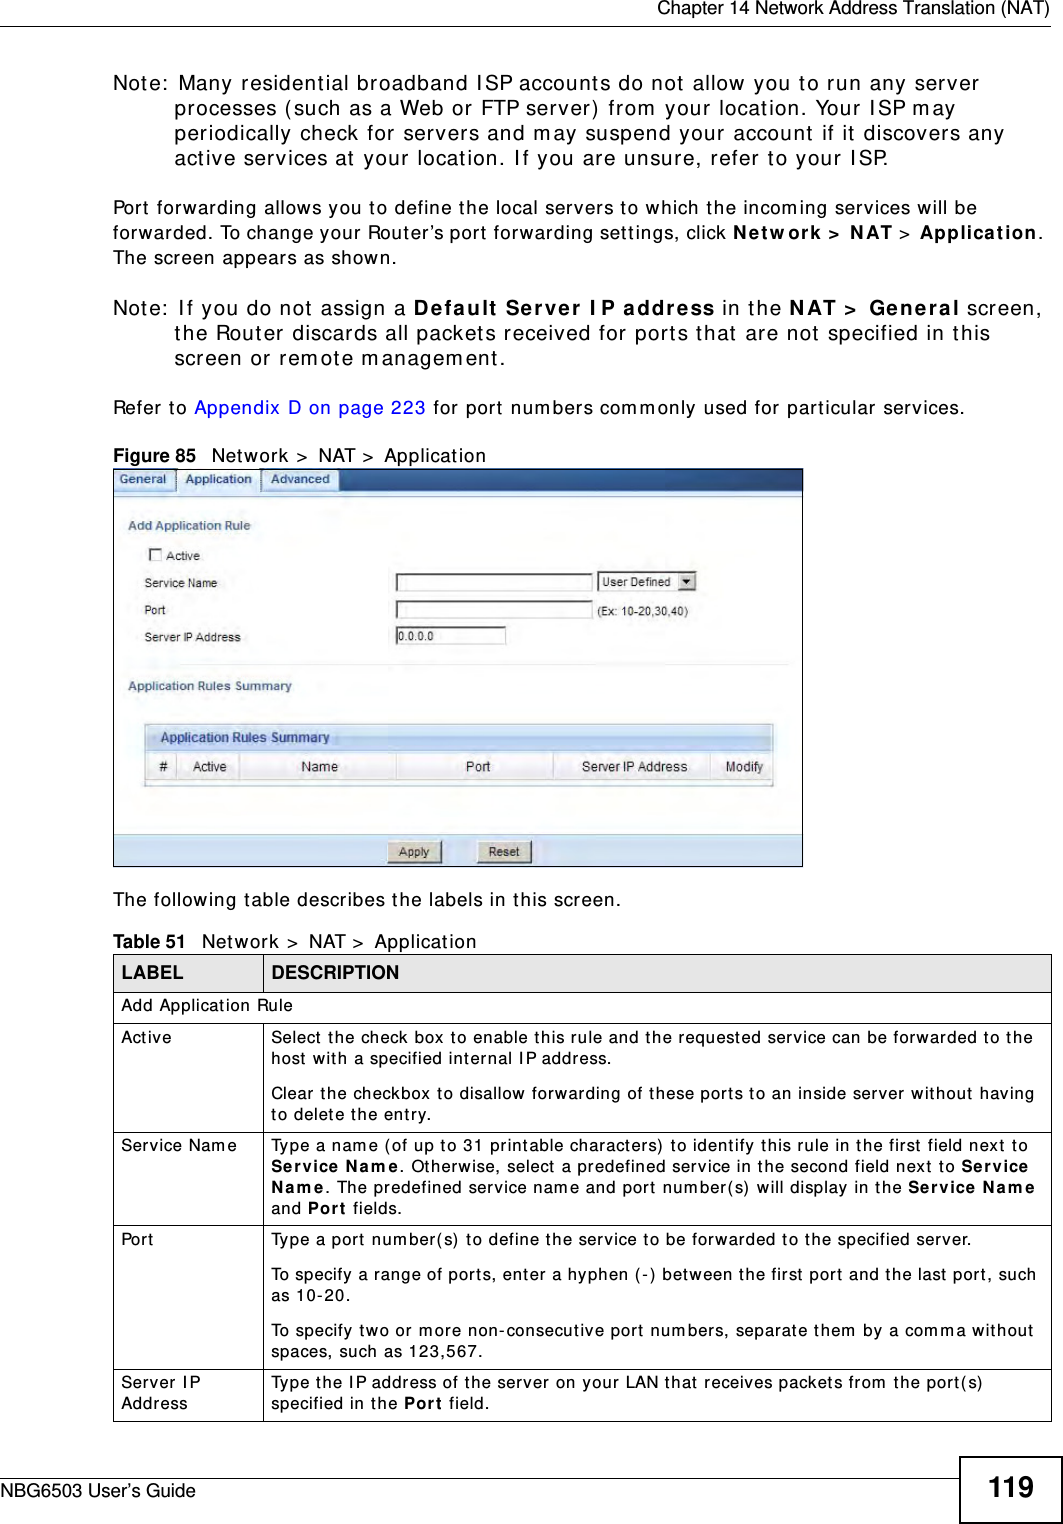  Chapter 14 Network Address Translation (NAT)NBG6503 User’s Guide 119Note: Many residential broadband ISP accounts do not allow you to run any server processes (such as a Web or FTP server) from your location. Your ISP may periodically check for servers and may suspend your account if it discovers any active services at your location. If you are unsure, refer to your ISP.Port forwarding allows you to define the local servers to which the incoming services will be forwarded. To change your Router’s port forwarding settings, click Network &gt; NAT &gt; Application. The screen appears as shown.Note: If you do not assign a Default Server IP address in the NAT &gt; General screen, the Router discards all packets received for ports that are not specified in this screen or remote management.Refer to Appendix D on page 223 for port numbers commonly used for particular services.Figure 85   Network &gt; NAT &gt; Application The following table describes the labels in this screen.Table 51   Network &gt; NAT &gt; ApplicationLABEL DESCRIPTIONAdd Application RuleActive  Select the check box to enable this rule and the requested service can be forwarded to the host with a specified internal IP address.Clear the checkbox to disallow forwarding of these ports to an inside server without having to delete the entry. Service Name Type a name (of up to 31 printable characters) to identify this rule in the first field next to Service Name. Otherwise, select a predefined service in the second field next to Service Name. The predefined service name and port number(s) will display in the Service Name and Port fields.Port Type a port number(s) to define the service to be forwarded to the specified server.To specify a range of ports, enter a hyphen (-) between the first port and the last port, such as 10-20.To specify two or more non-consecutive port numbers, separate them by a comma without spaces, such as 123,567.Server IP Address Type the IP address of the server on your LAN that receives packets from the port(s) specified in the Port field.